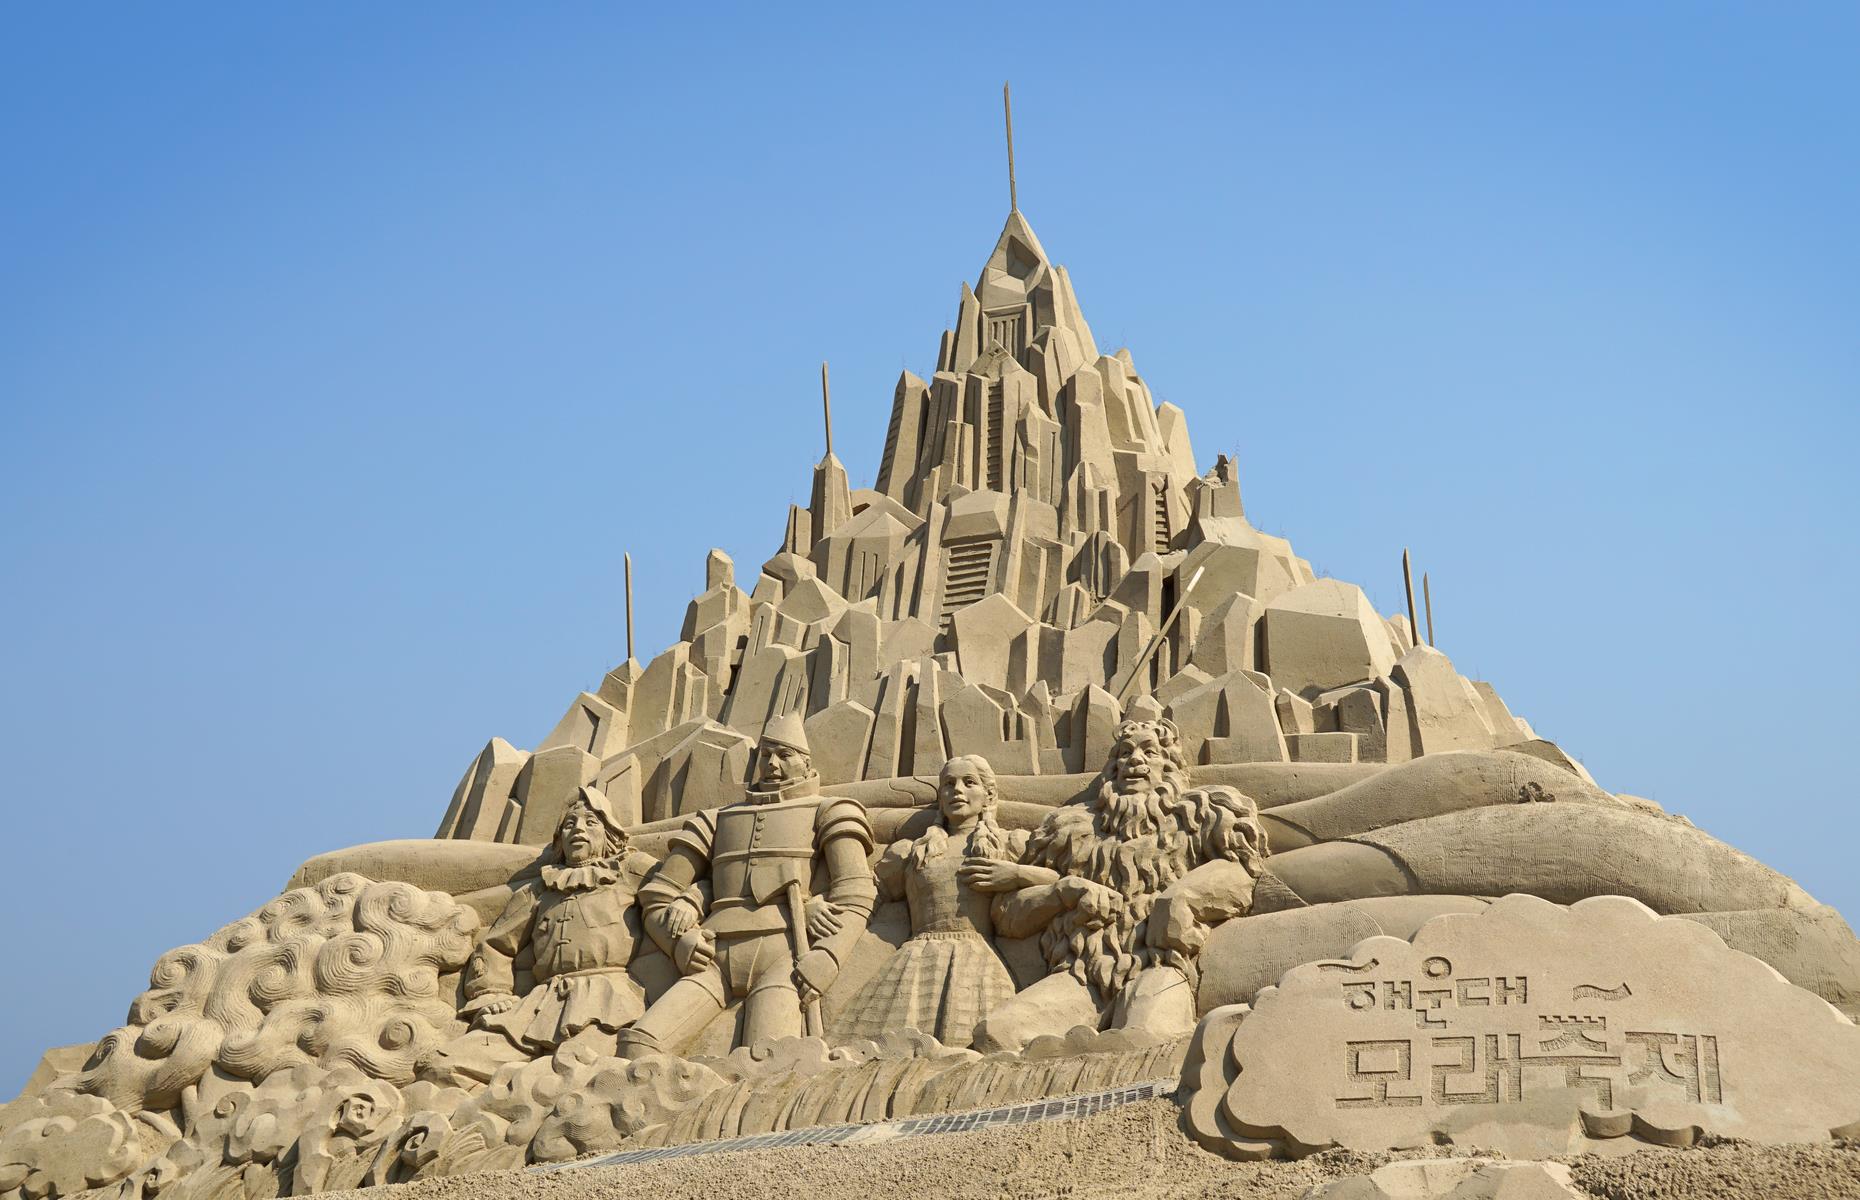 Another eye-catching work of sand art at the 2019 Busan-based festival was this the Wonderful Wizard of Oz model. The detailed representation of the Emerald City and characters were the creation of five Korean artists.